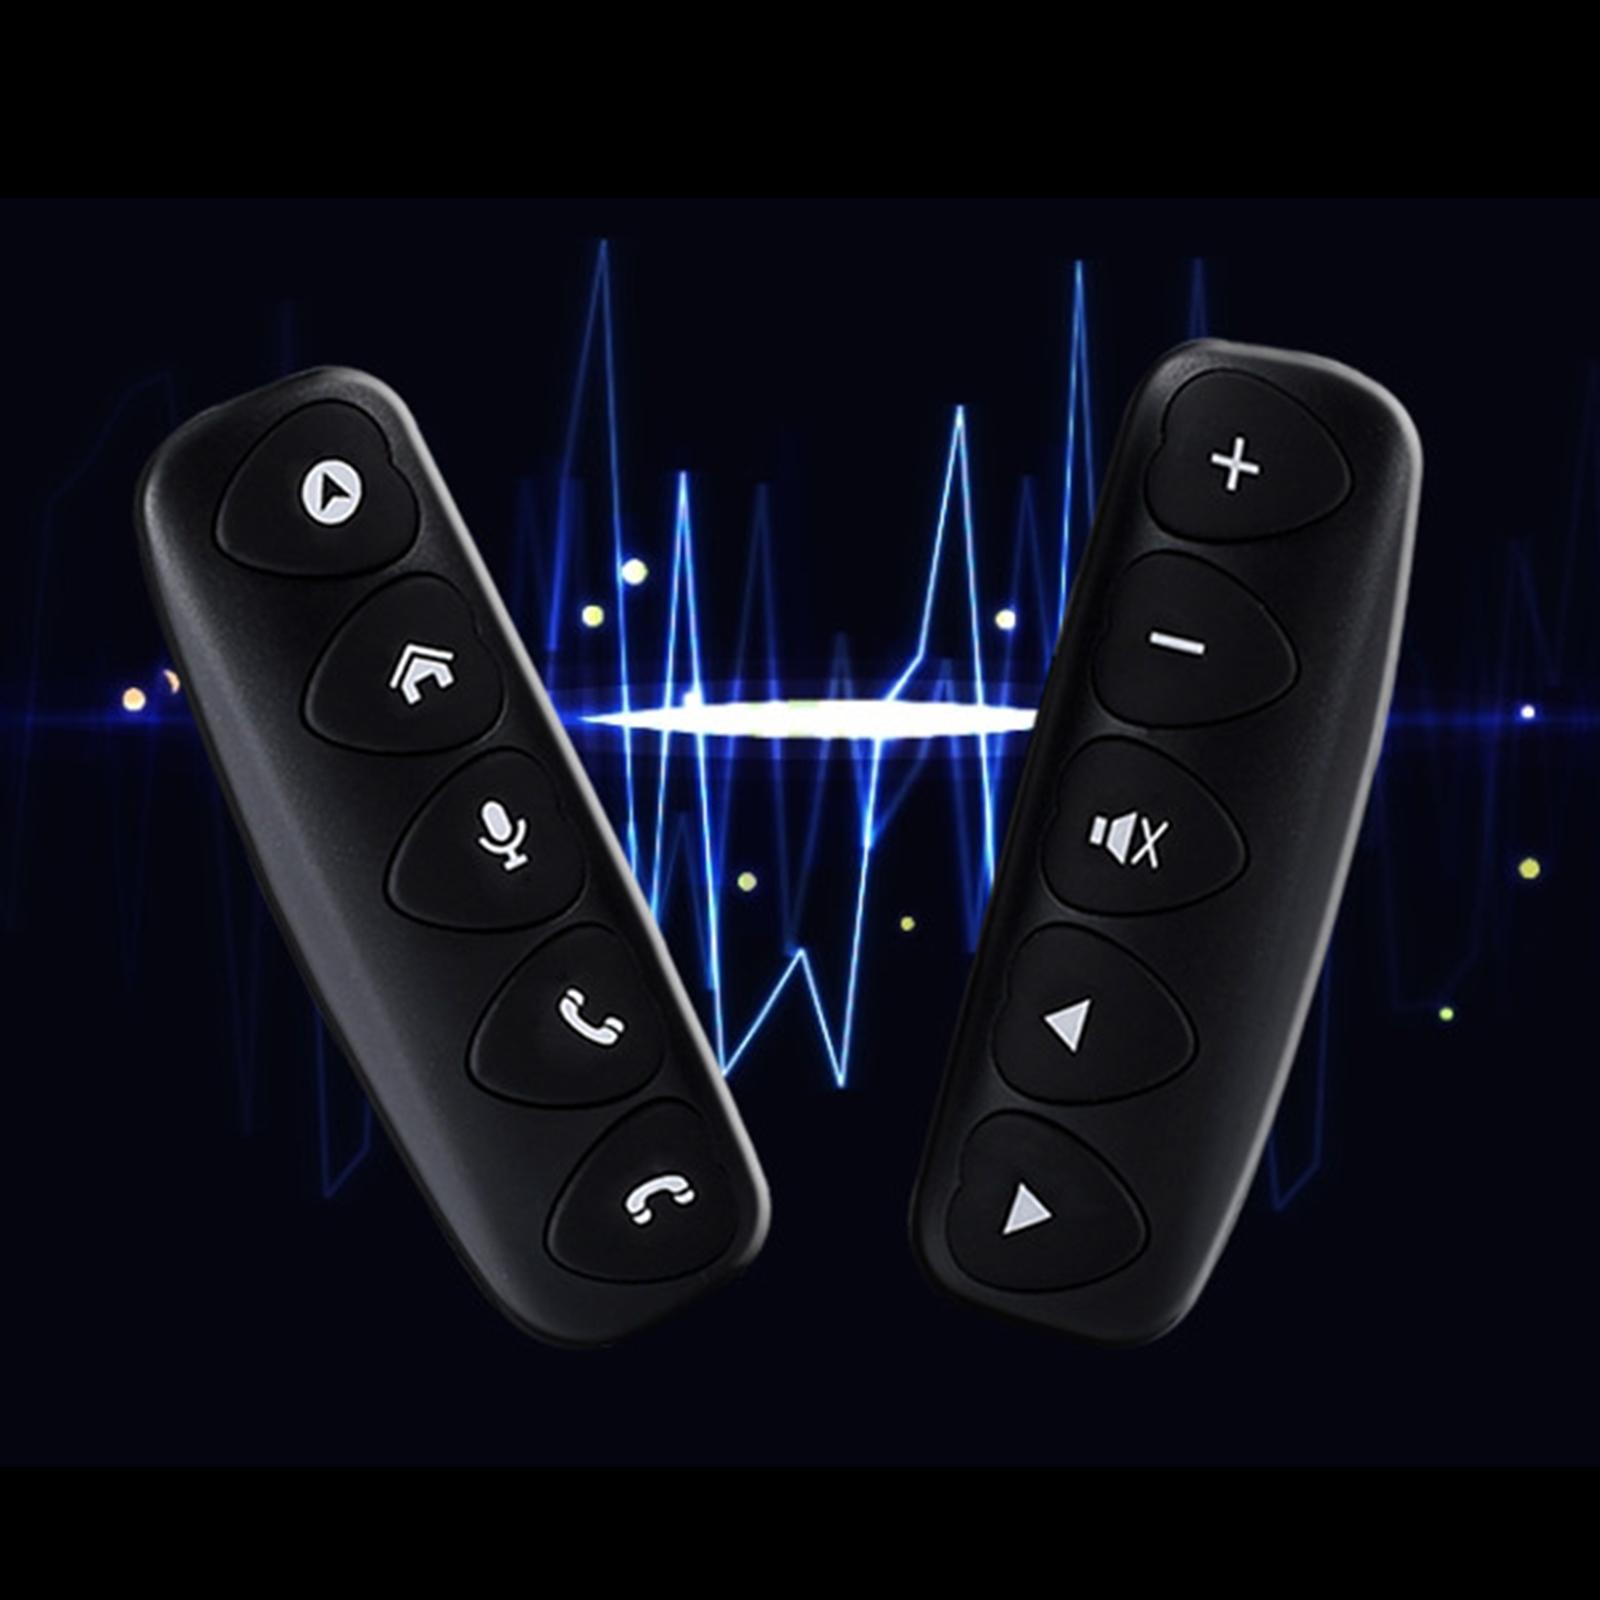 Remote Control Universal Multifunction Fit for Car Radio Stereo Controlling